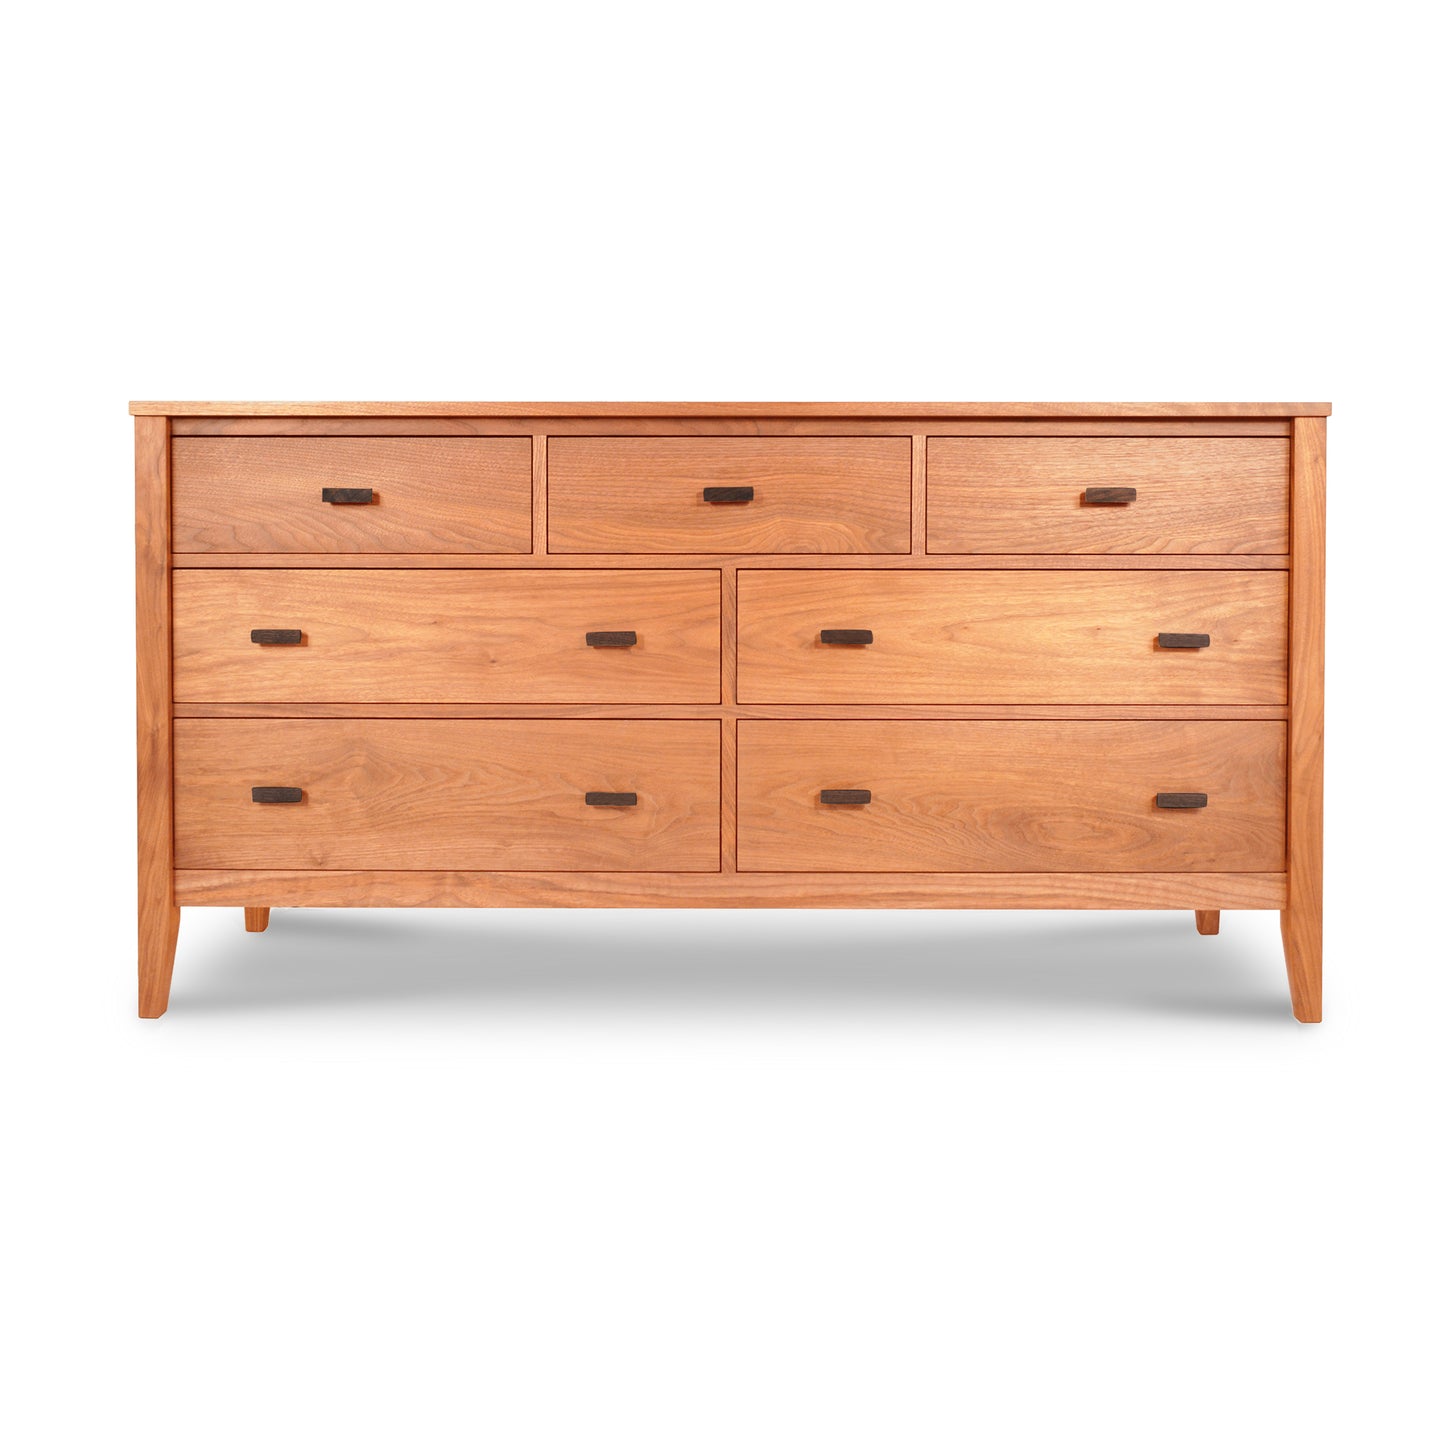 A Maple Corner Woodworks wooden dresser with nine drawers, placed against a white background. The Andover Modern 7-Drawer Dresser, made from natural cherry wood, features a smooth finish and simple, sturdy handles on each drawer.